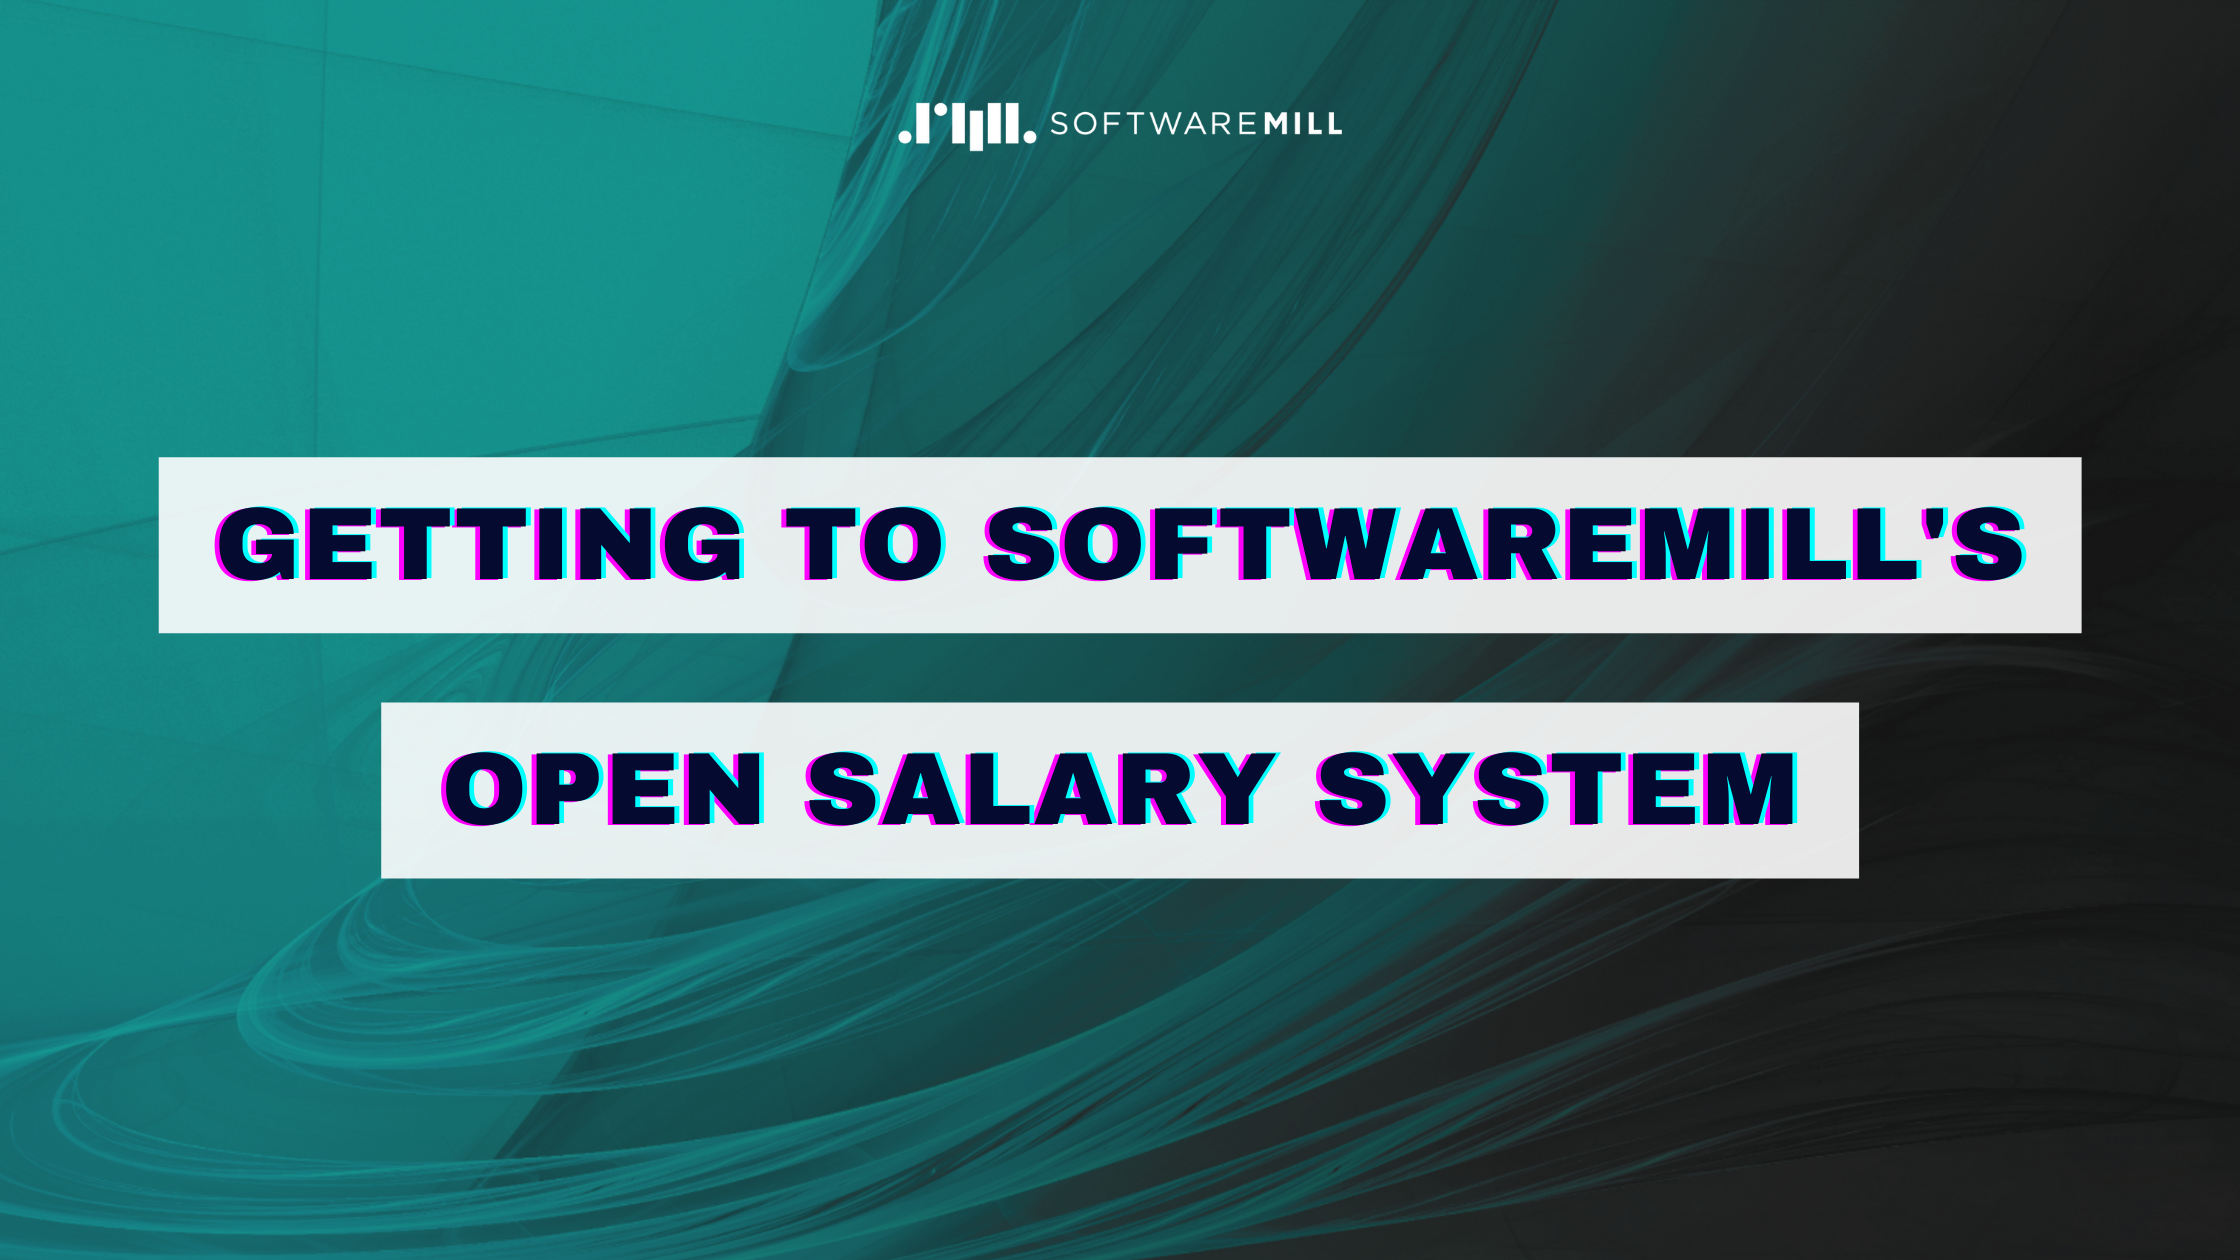 Getting to SoftwareMill's open salary system webp image